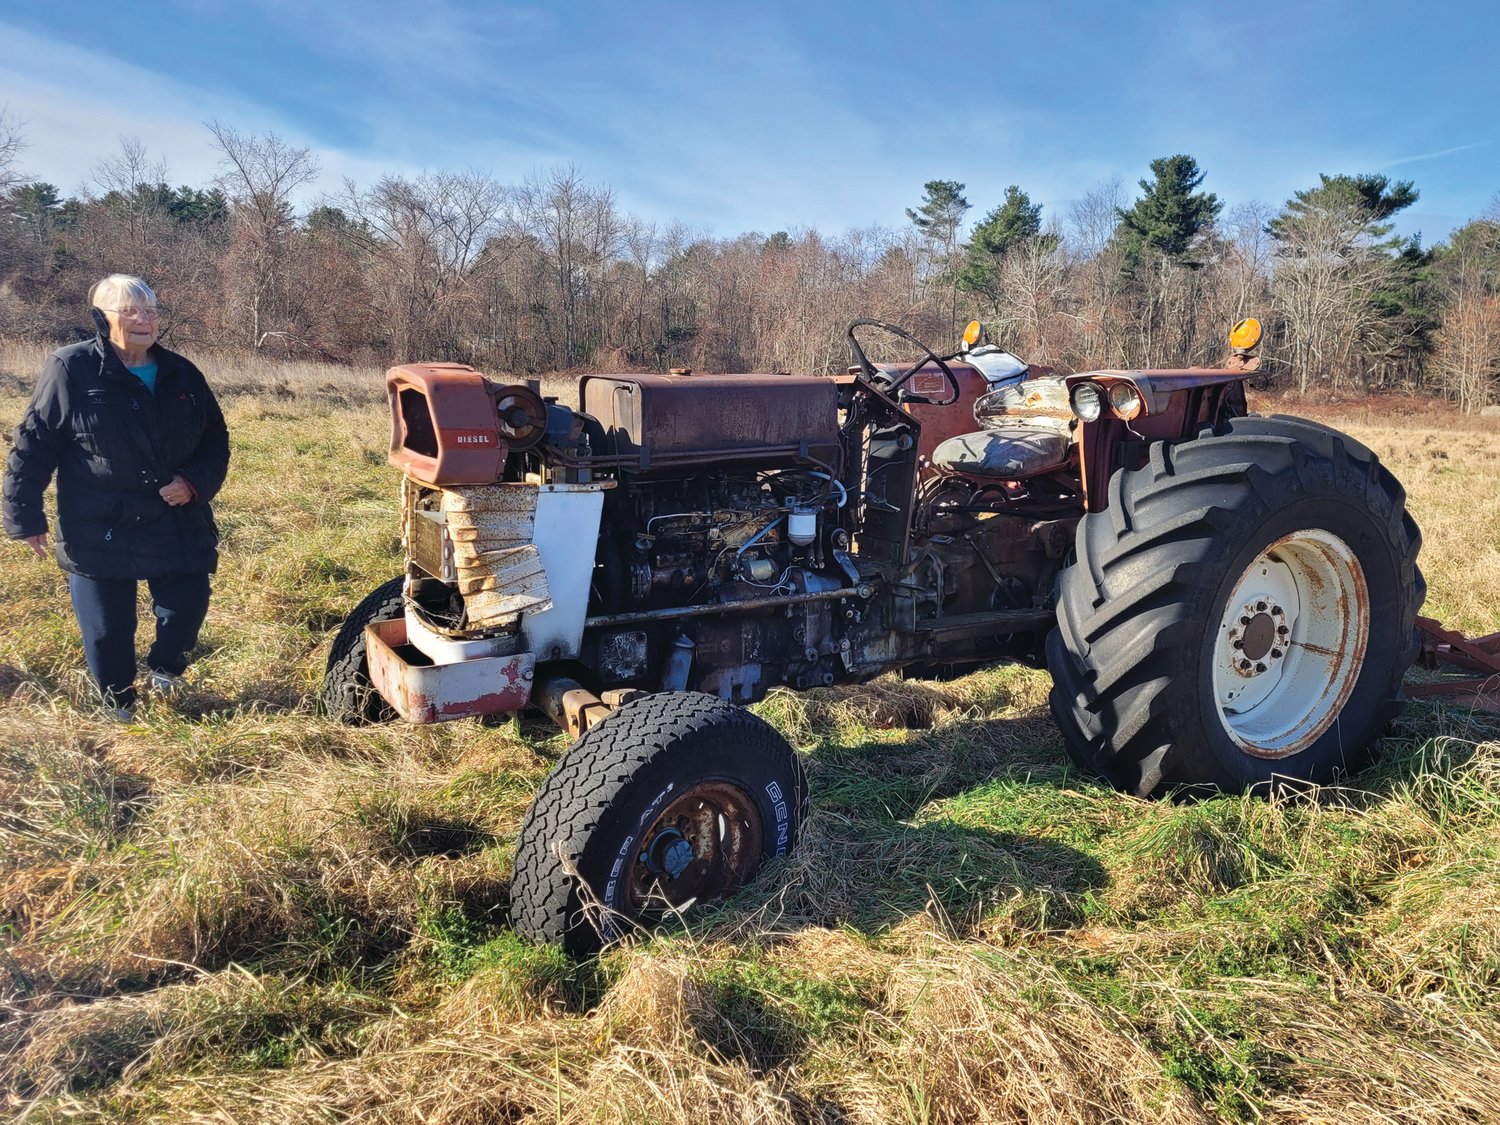 STILL KICKING: Sally Hicks, of Scituate, approaches her old old Massey Ferguson tractor. Neither Sally nor the tractor is ready to quit yet.